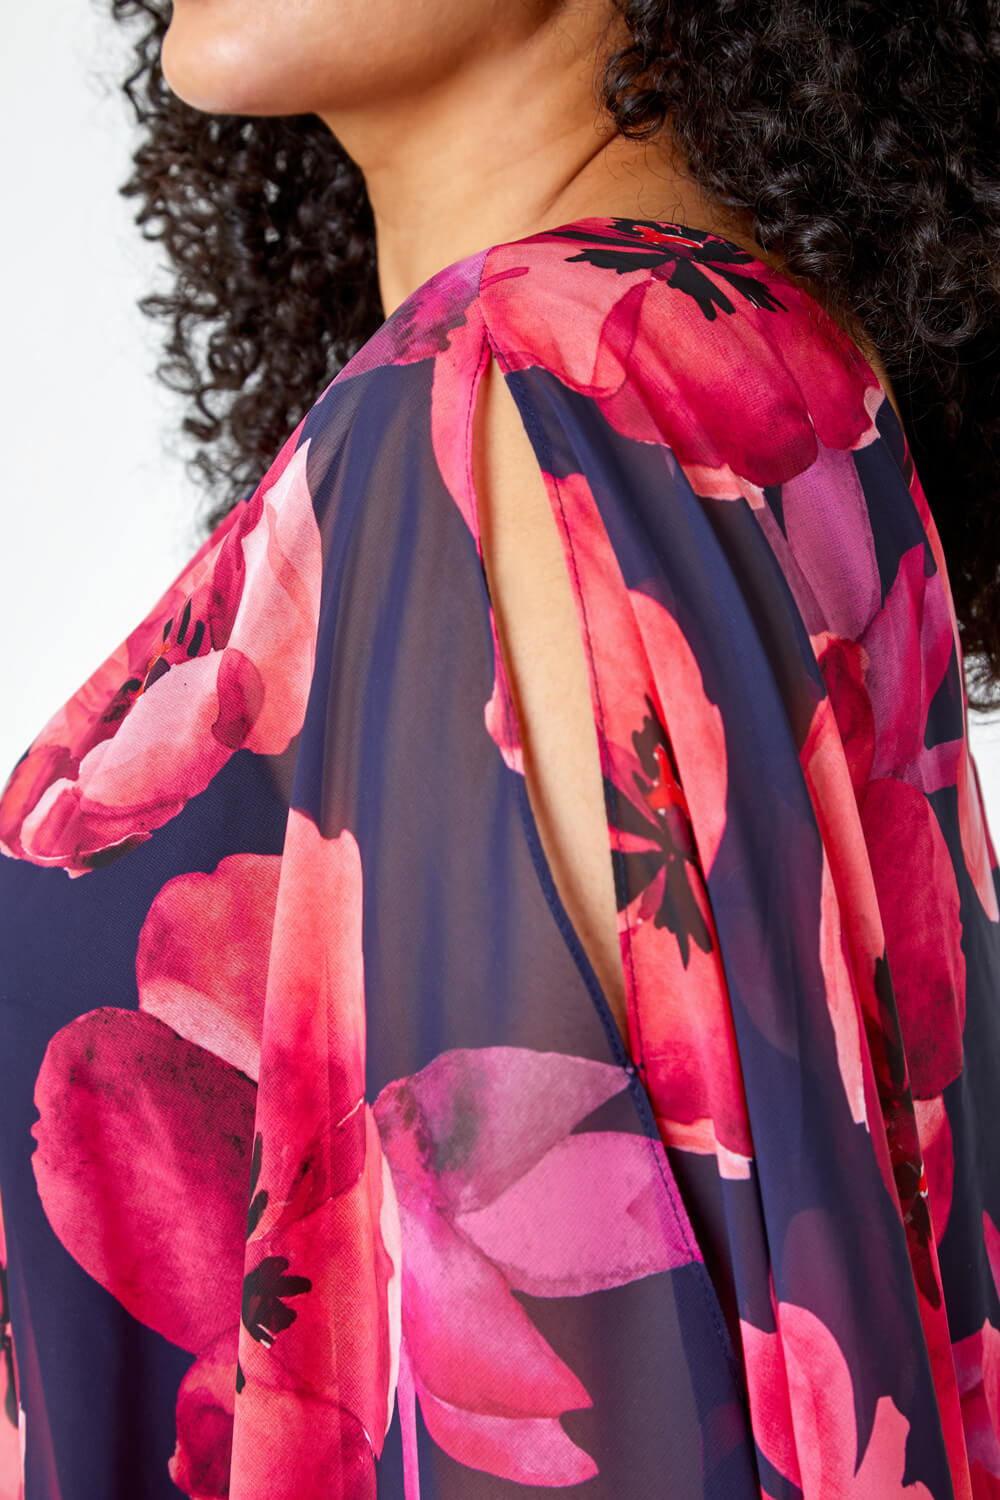 PINK Curve Floral Print Chiffon Overlay Top, Image 5 of 5